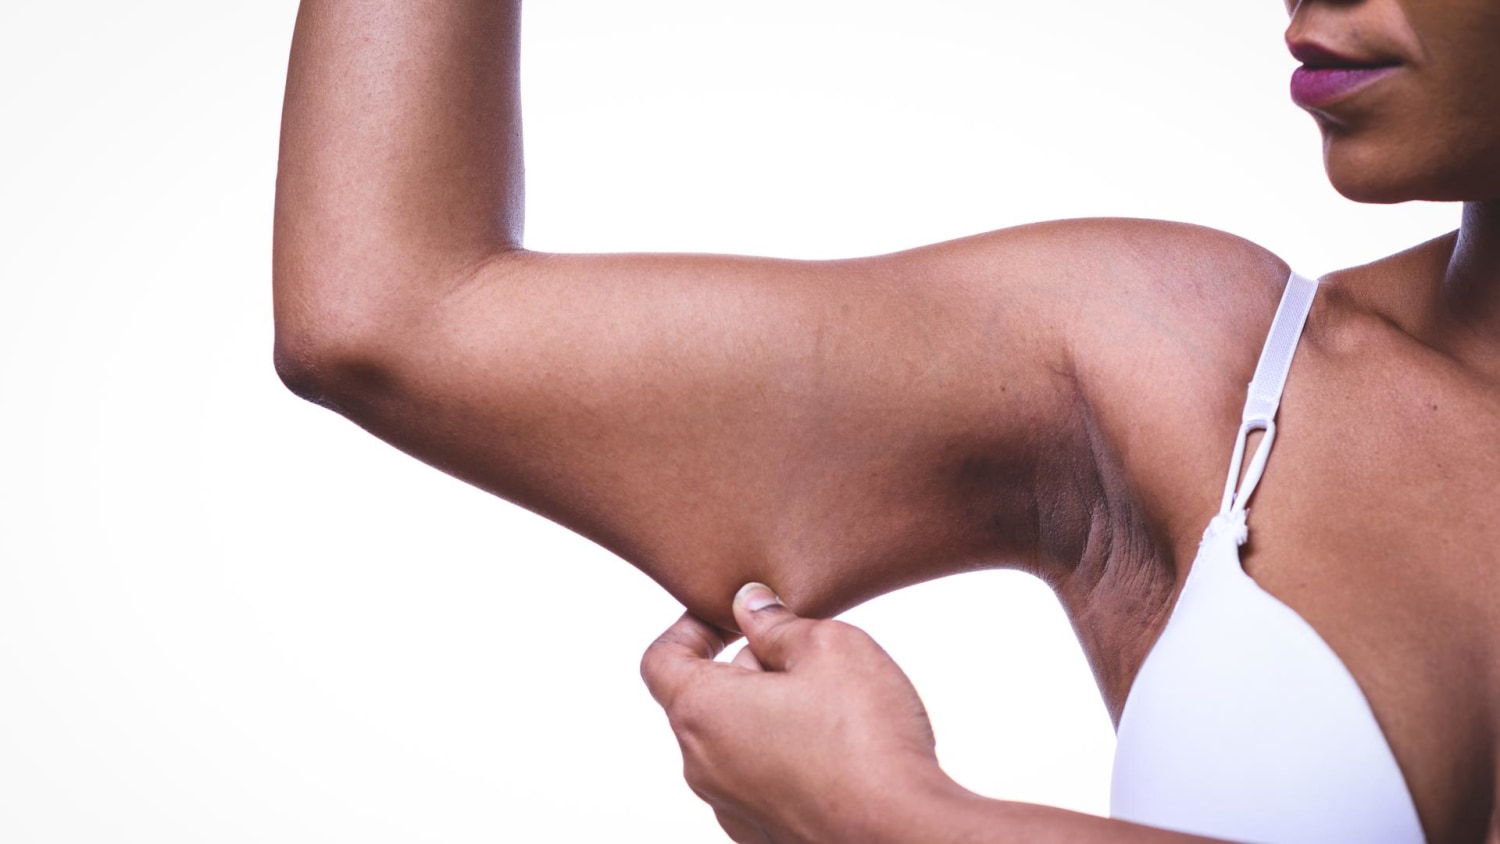 How to Fix Flabby Arms